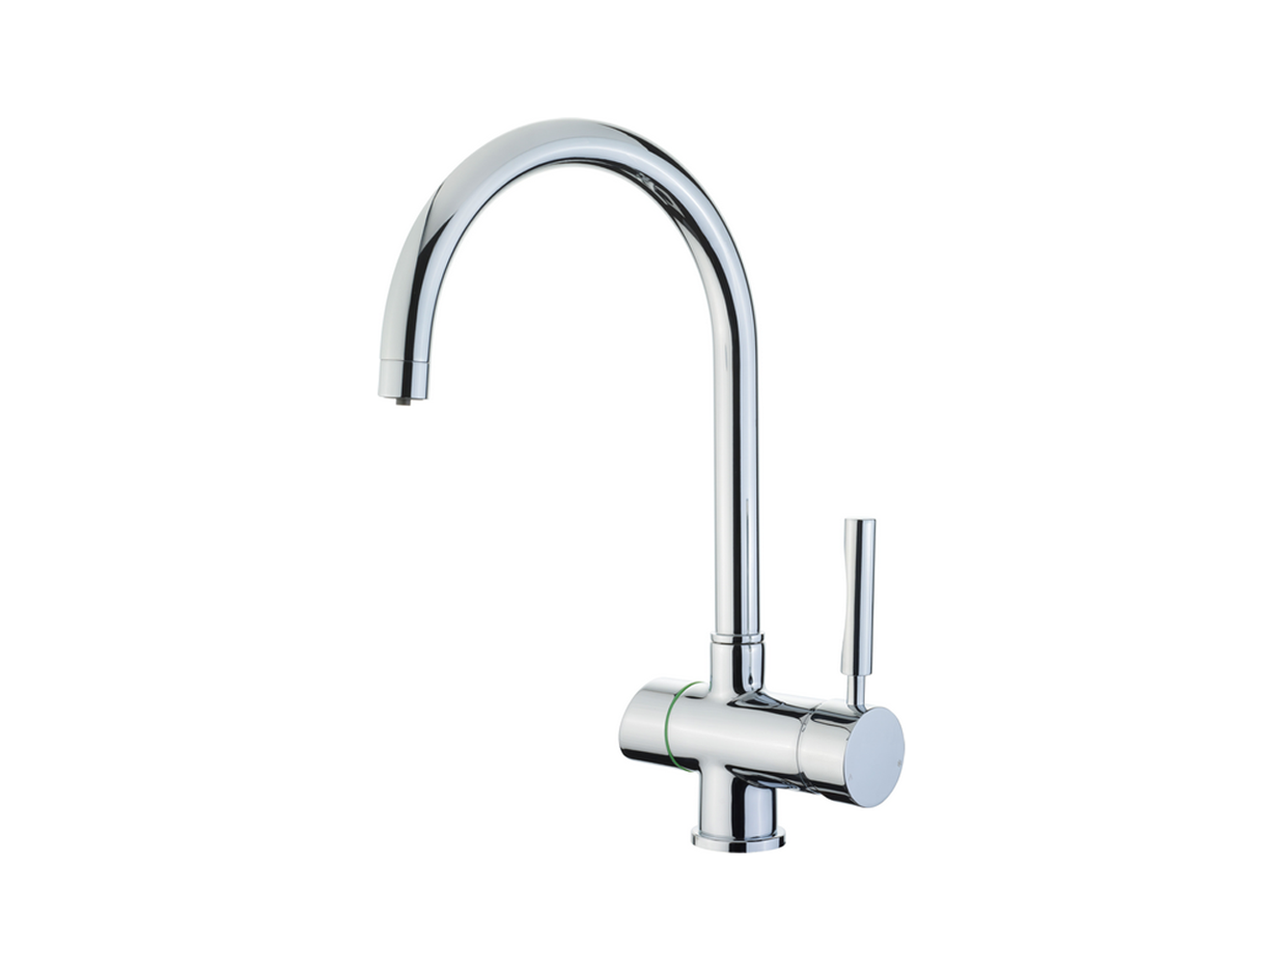 HUBERSingle lever sink mixer for OSMOSIS KITCHEN